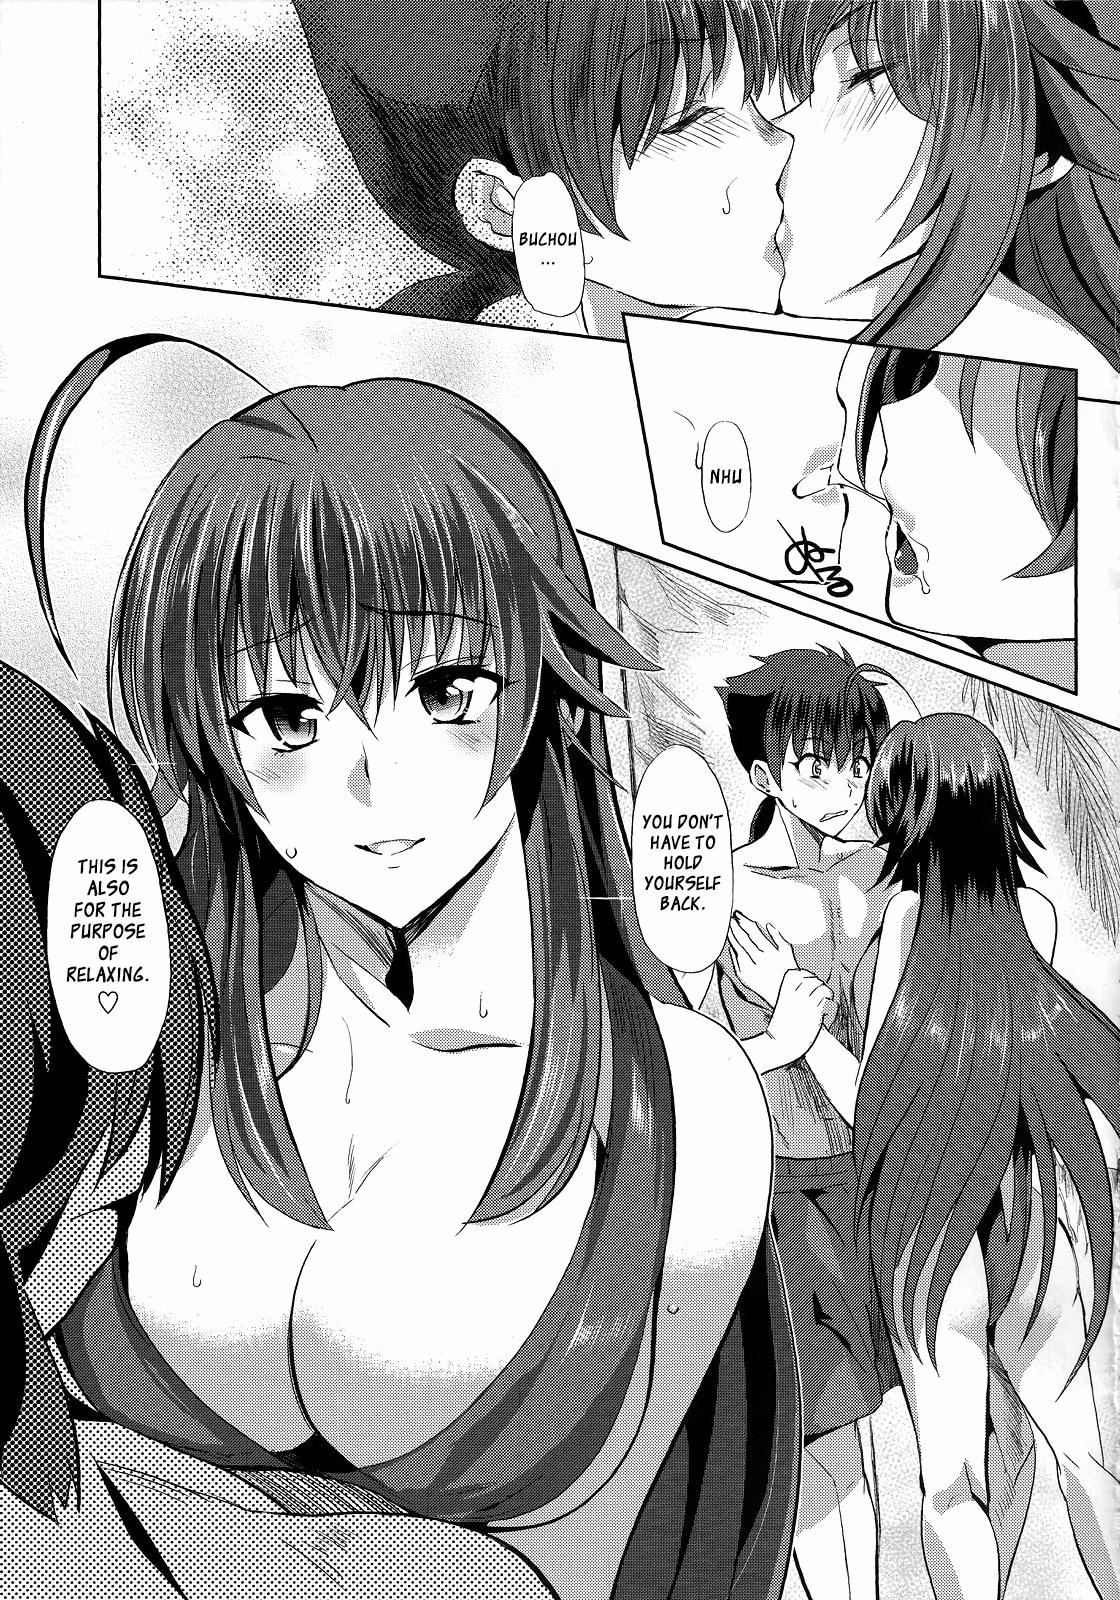 Punish Rias to DxD - Highschool dxd Freeporn - Page 4